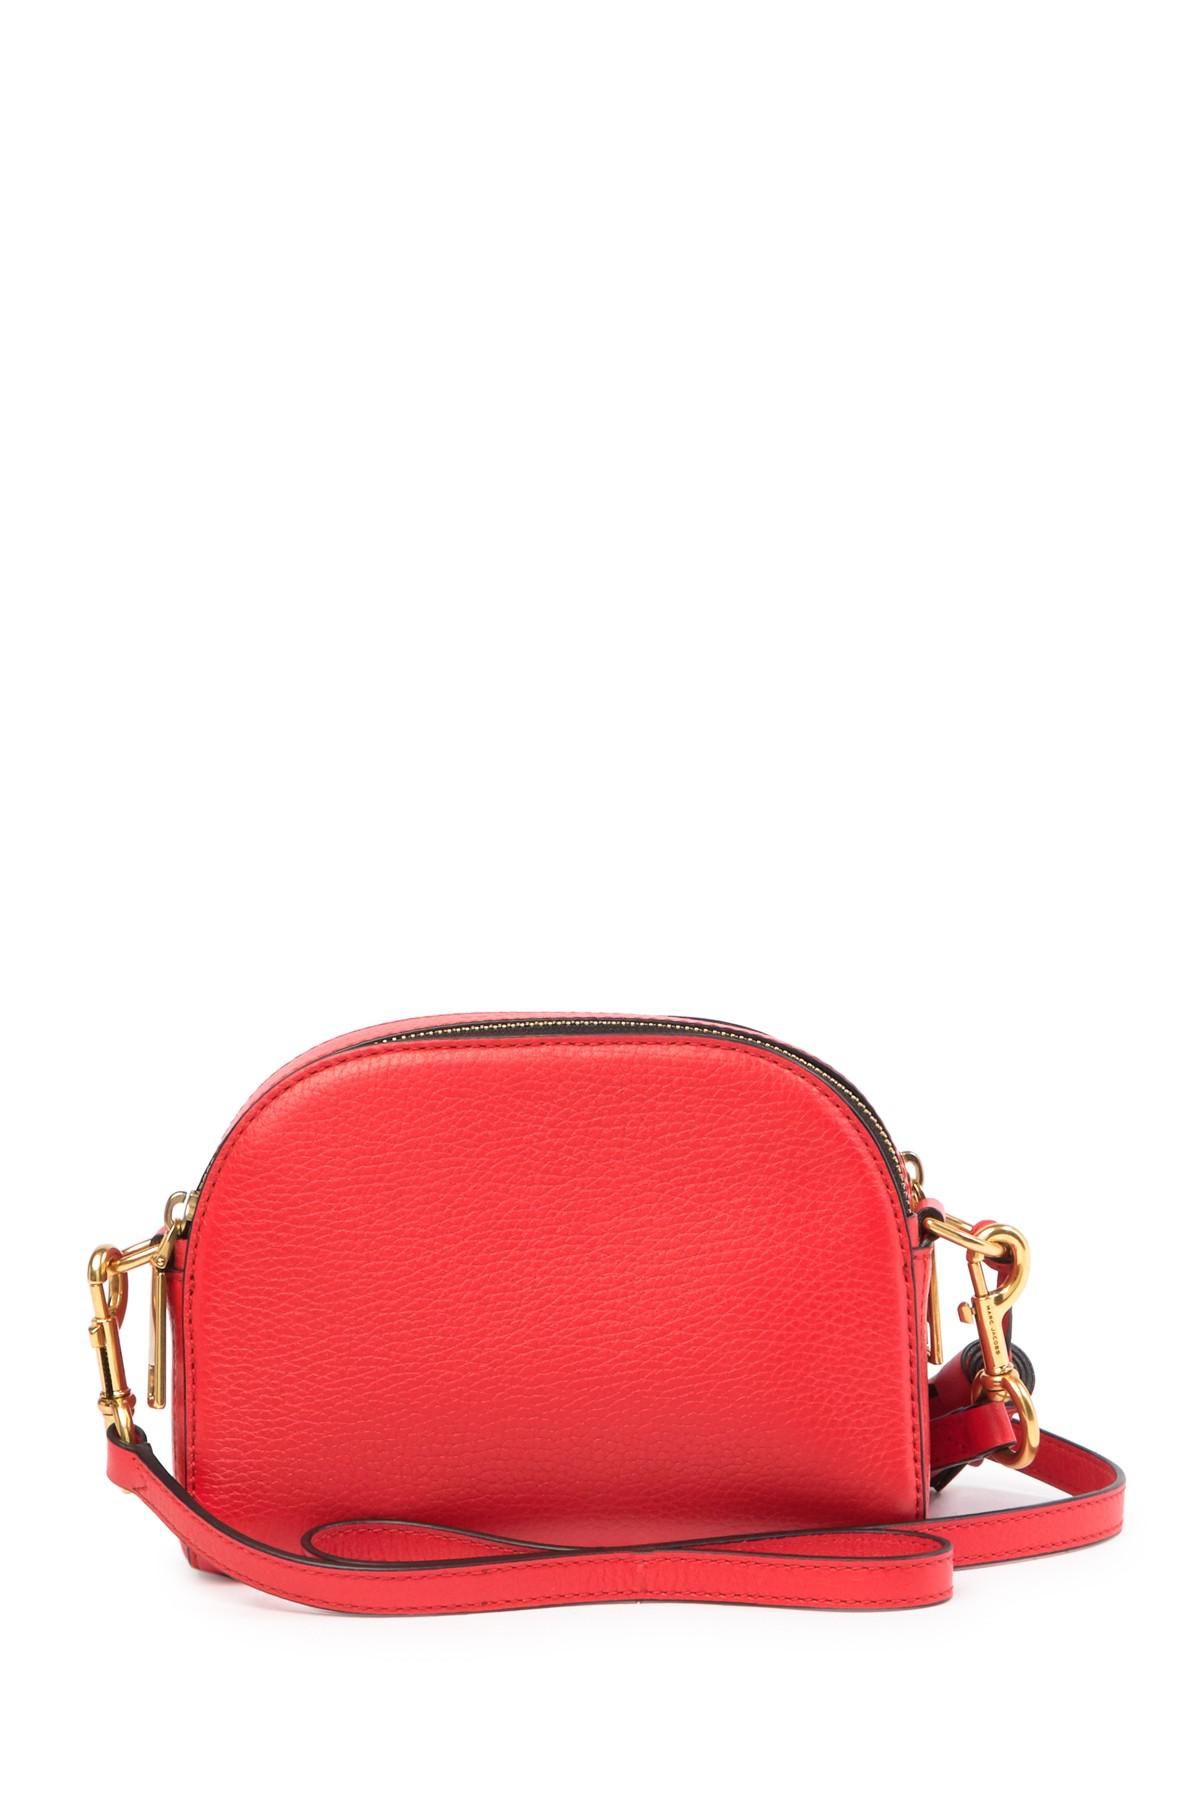 Marc Jacobs Shutter Leather Crossbody Bag in Red | Lyst